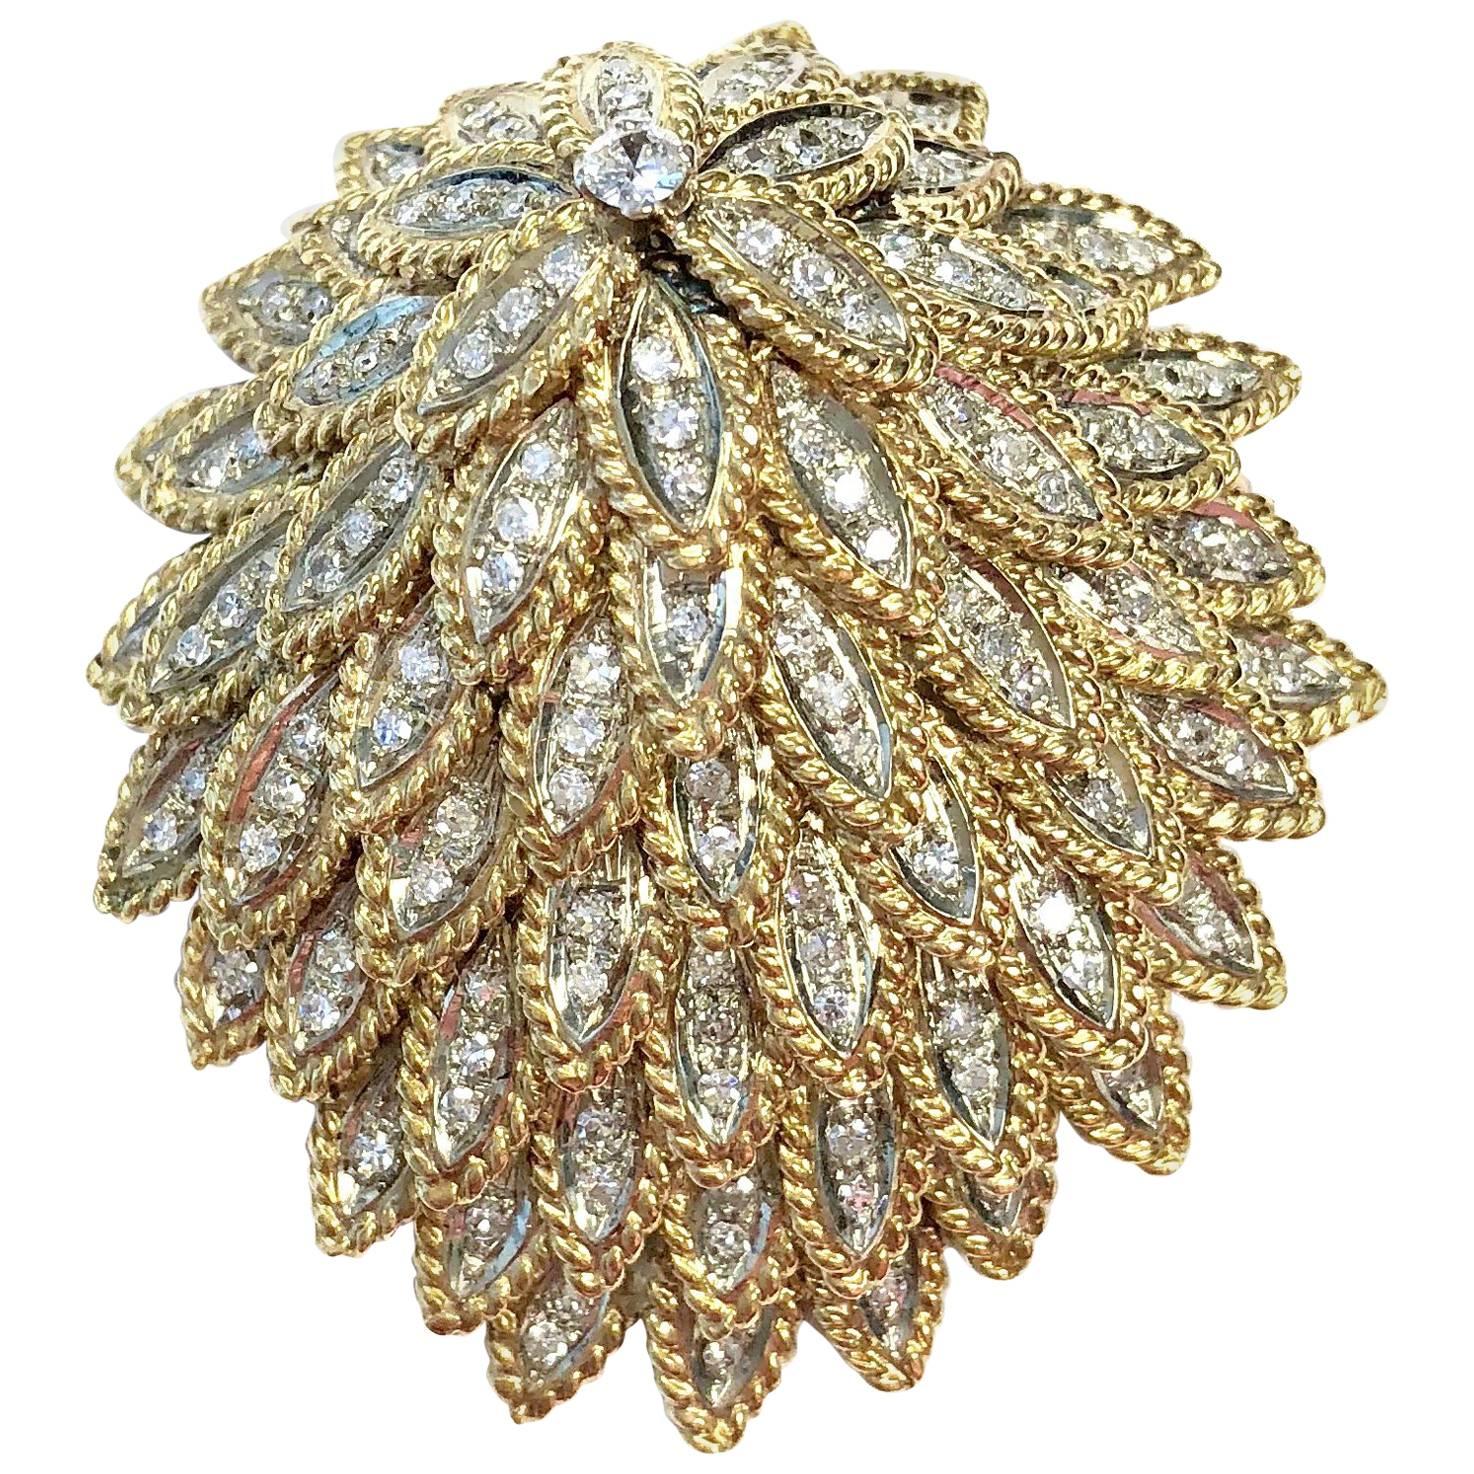 Vintage 4 Carats of Diamonds Gold Feather Brooch Pin